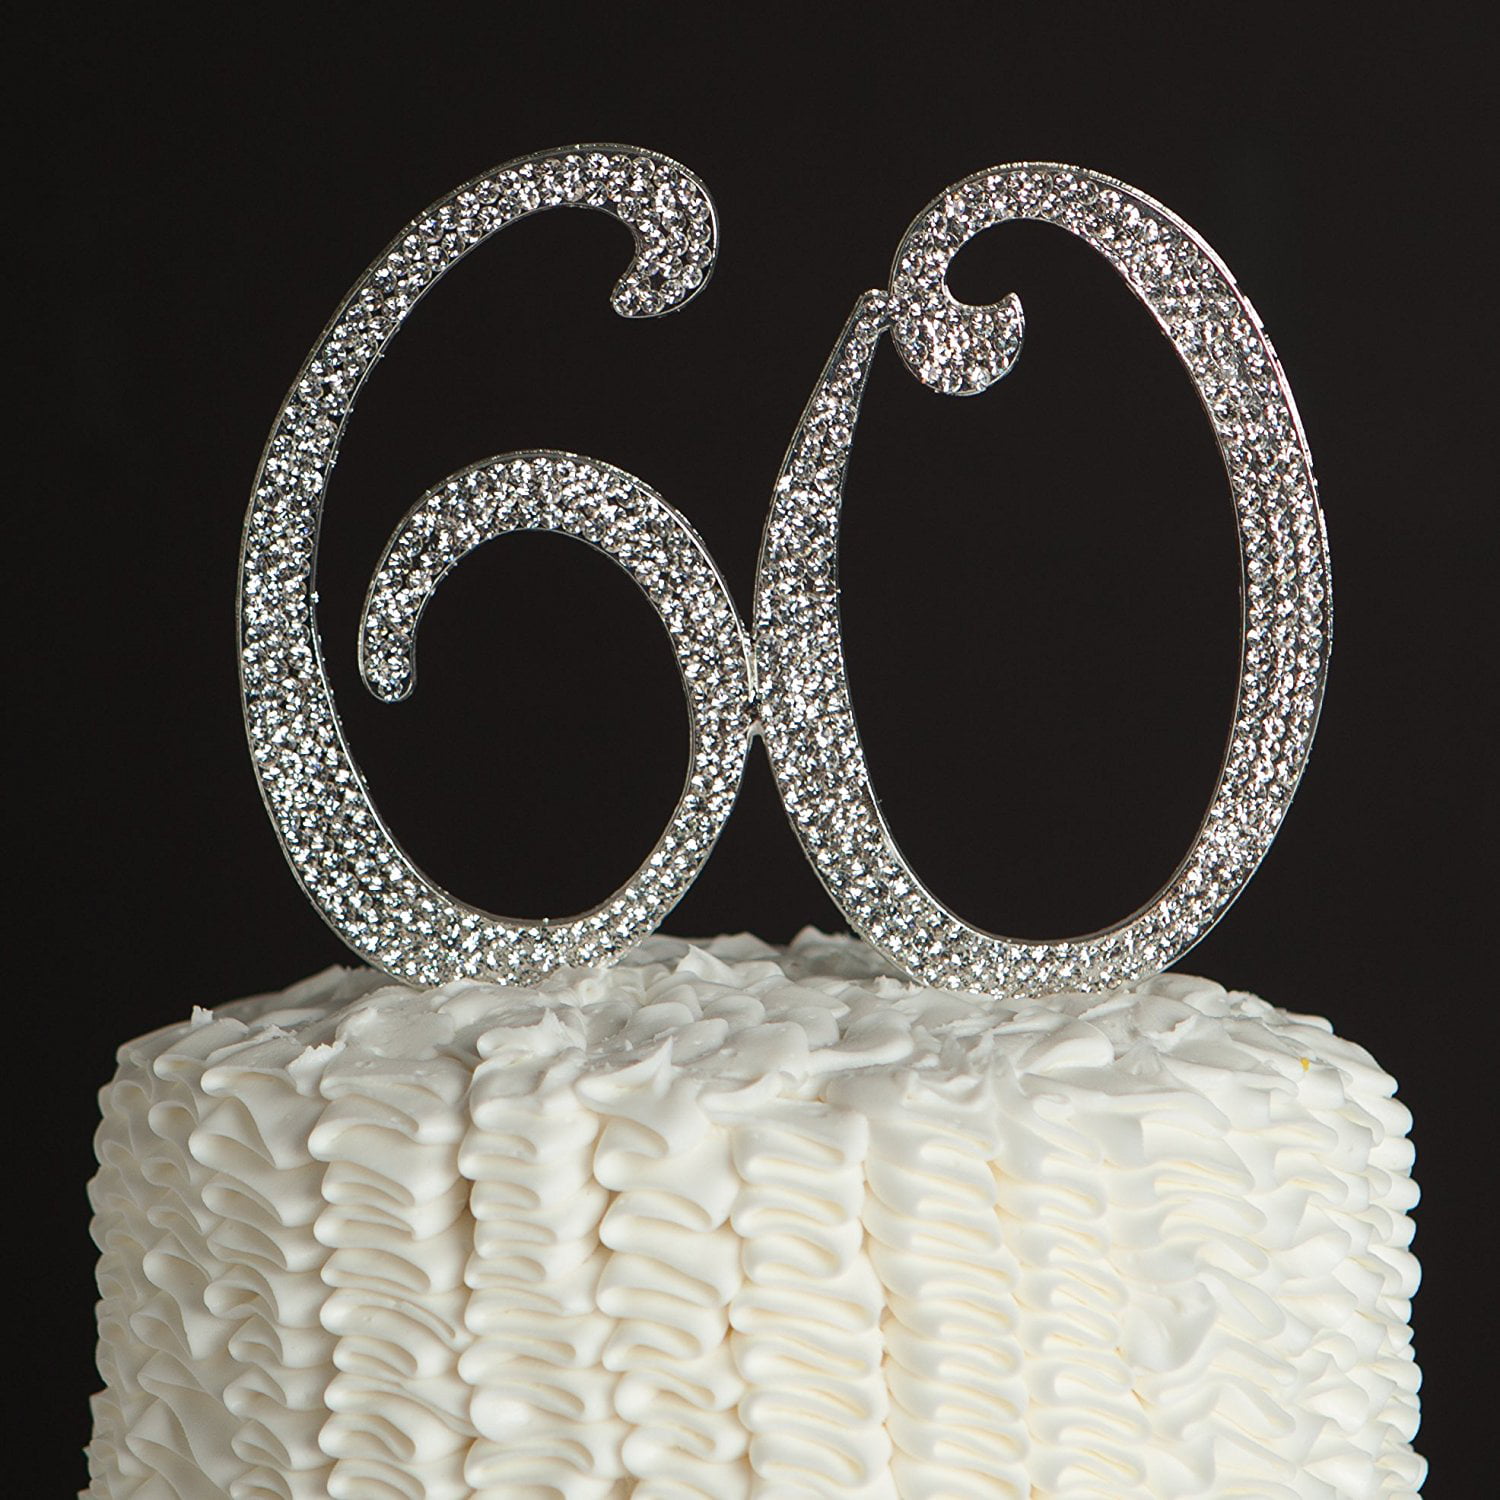 60 Cake Topper For 60th Birthday Or Anniversary Silver Party